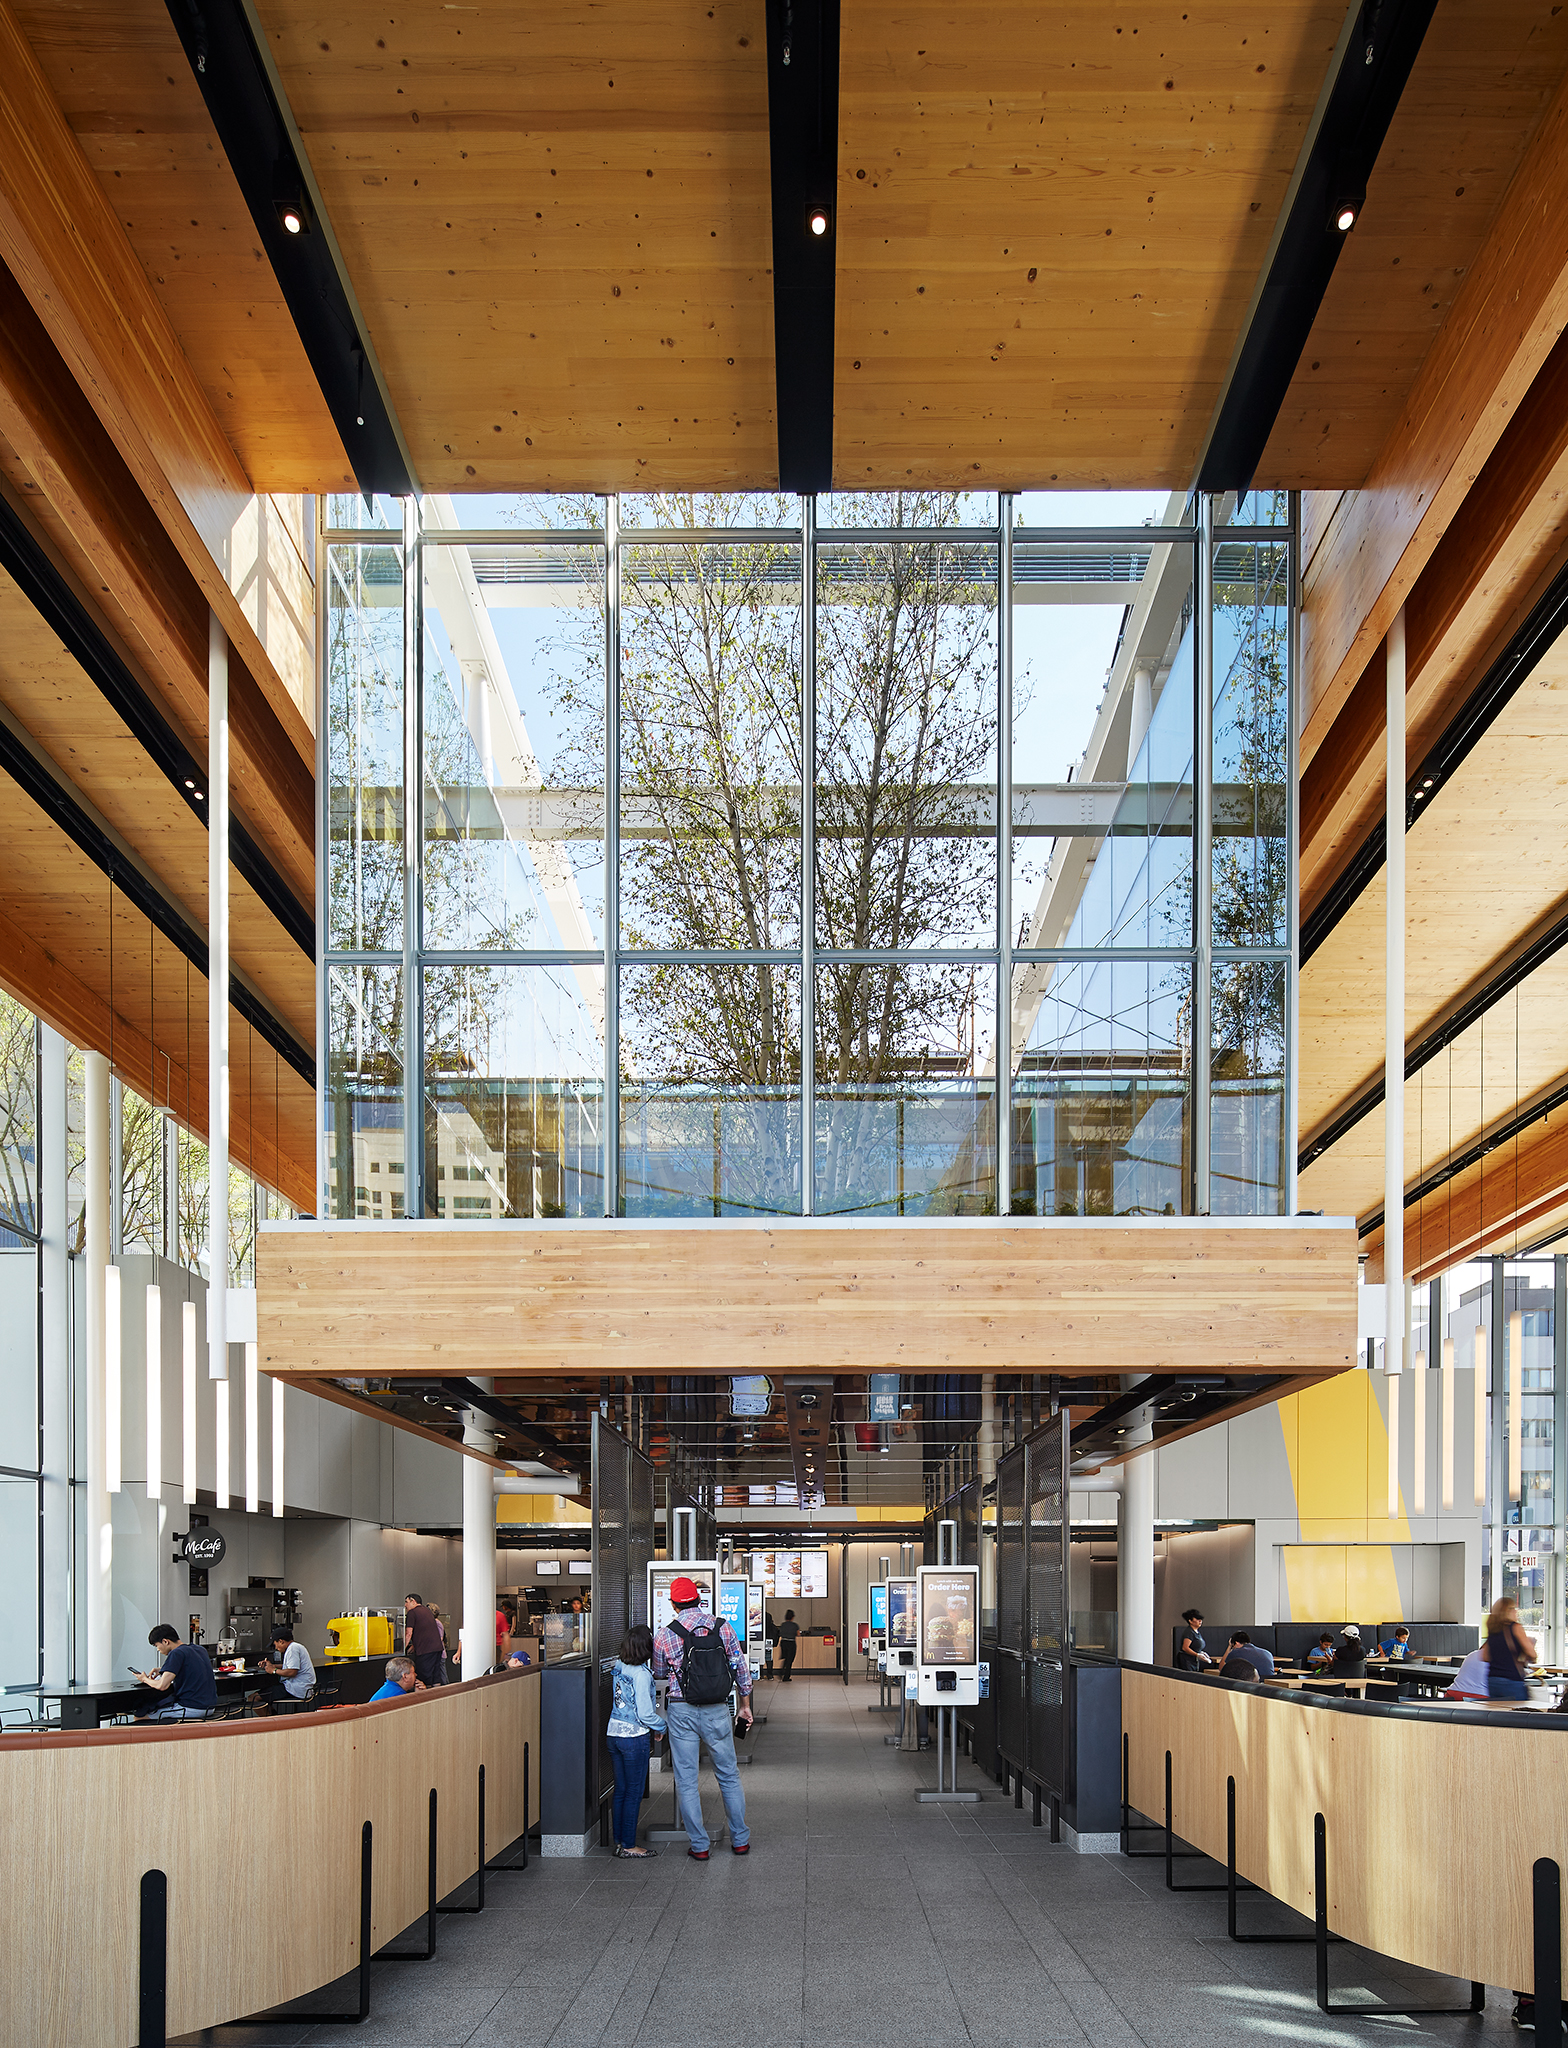  AWARDS    AIA Chicago Design Excellence Awards  2019  - Citation of Merit - Distinguished Building Award    McDonald’s Chicago Flagship  Ross Barney Architects  Chicago, IL     Return to Projects  